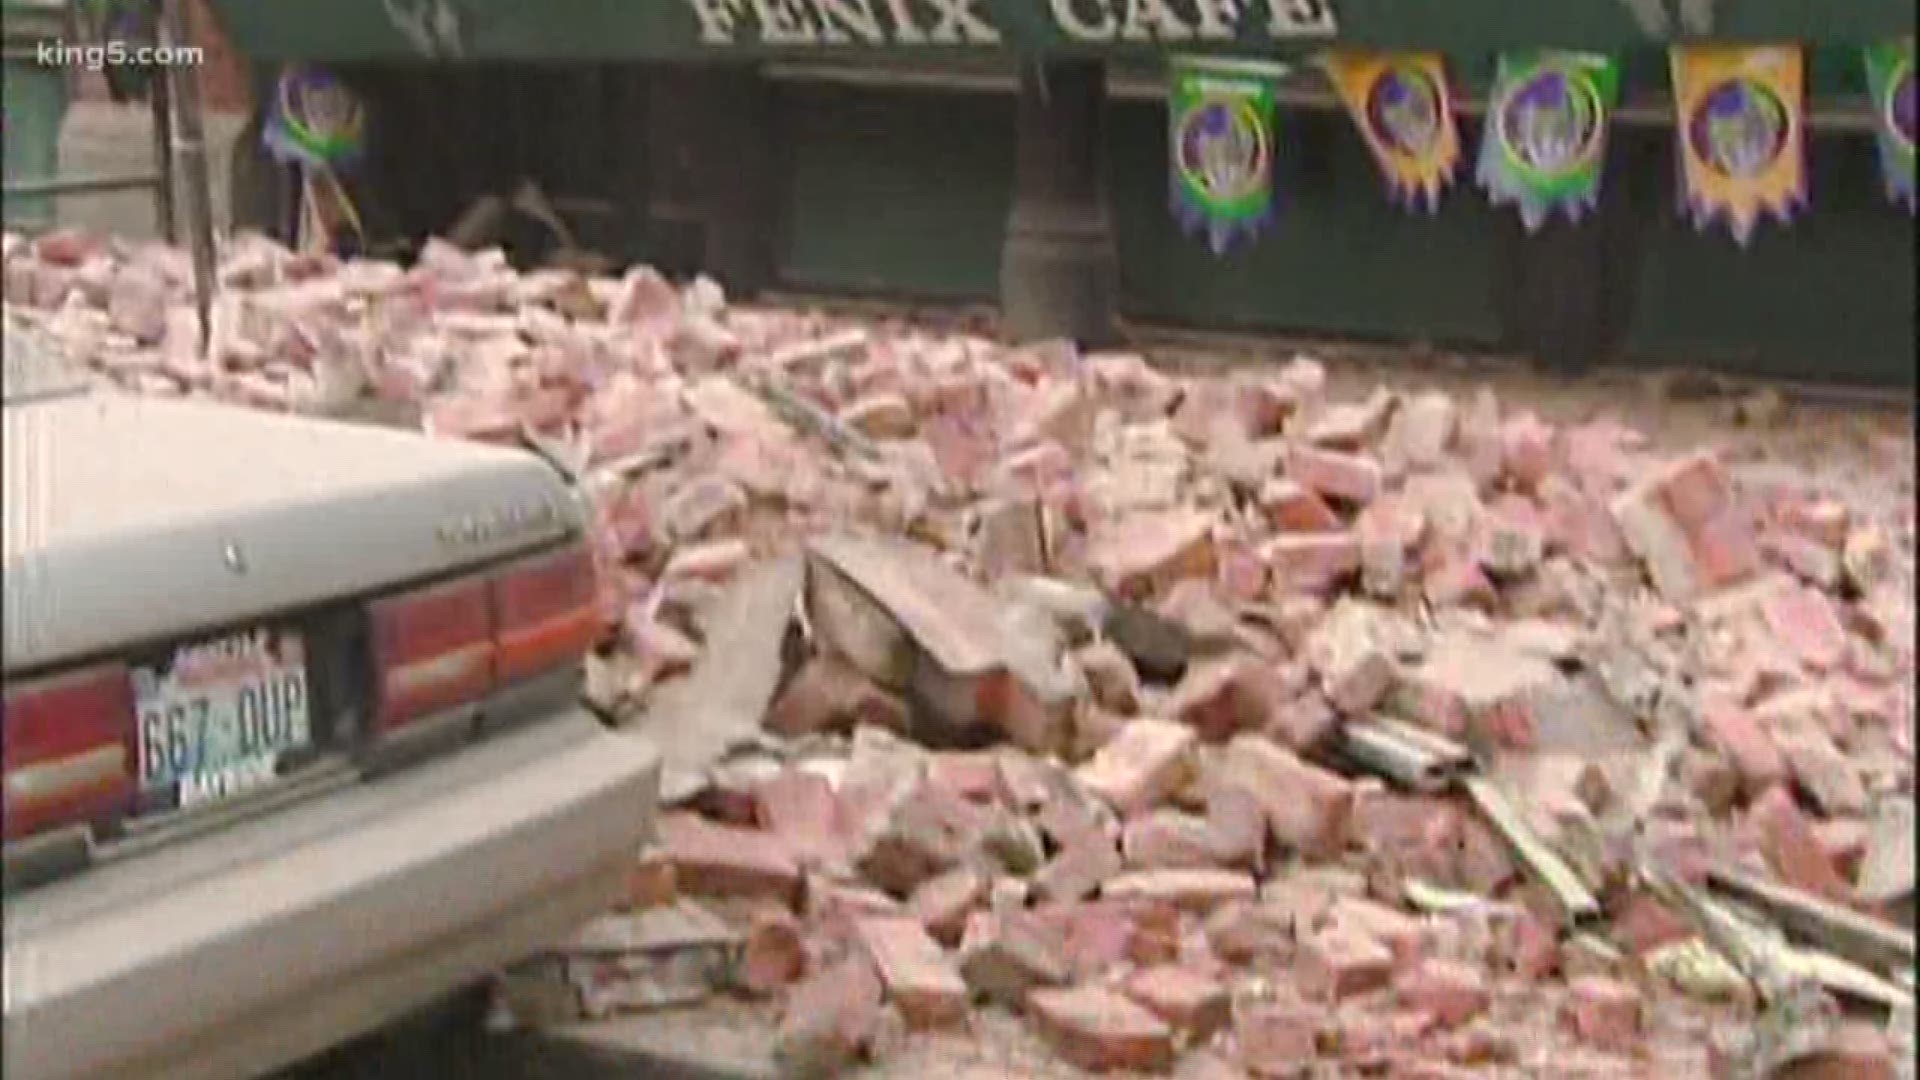 If you were in or near western Washington on February 28th, 2001, that was when a magnitude 6.8 magnitude earthquake struck. KING 5's Glenn Farley takes a look back and a look ahead.